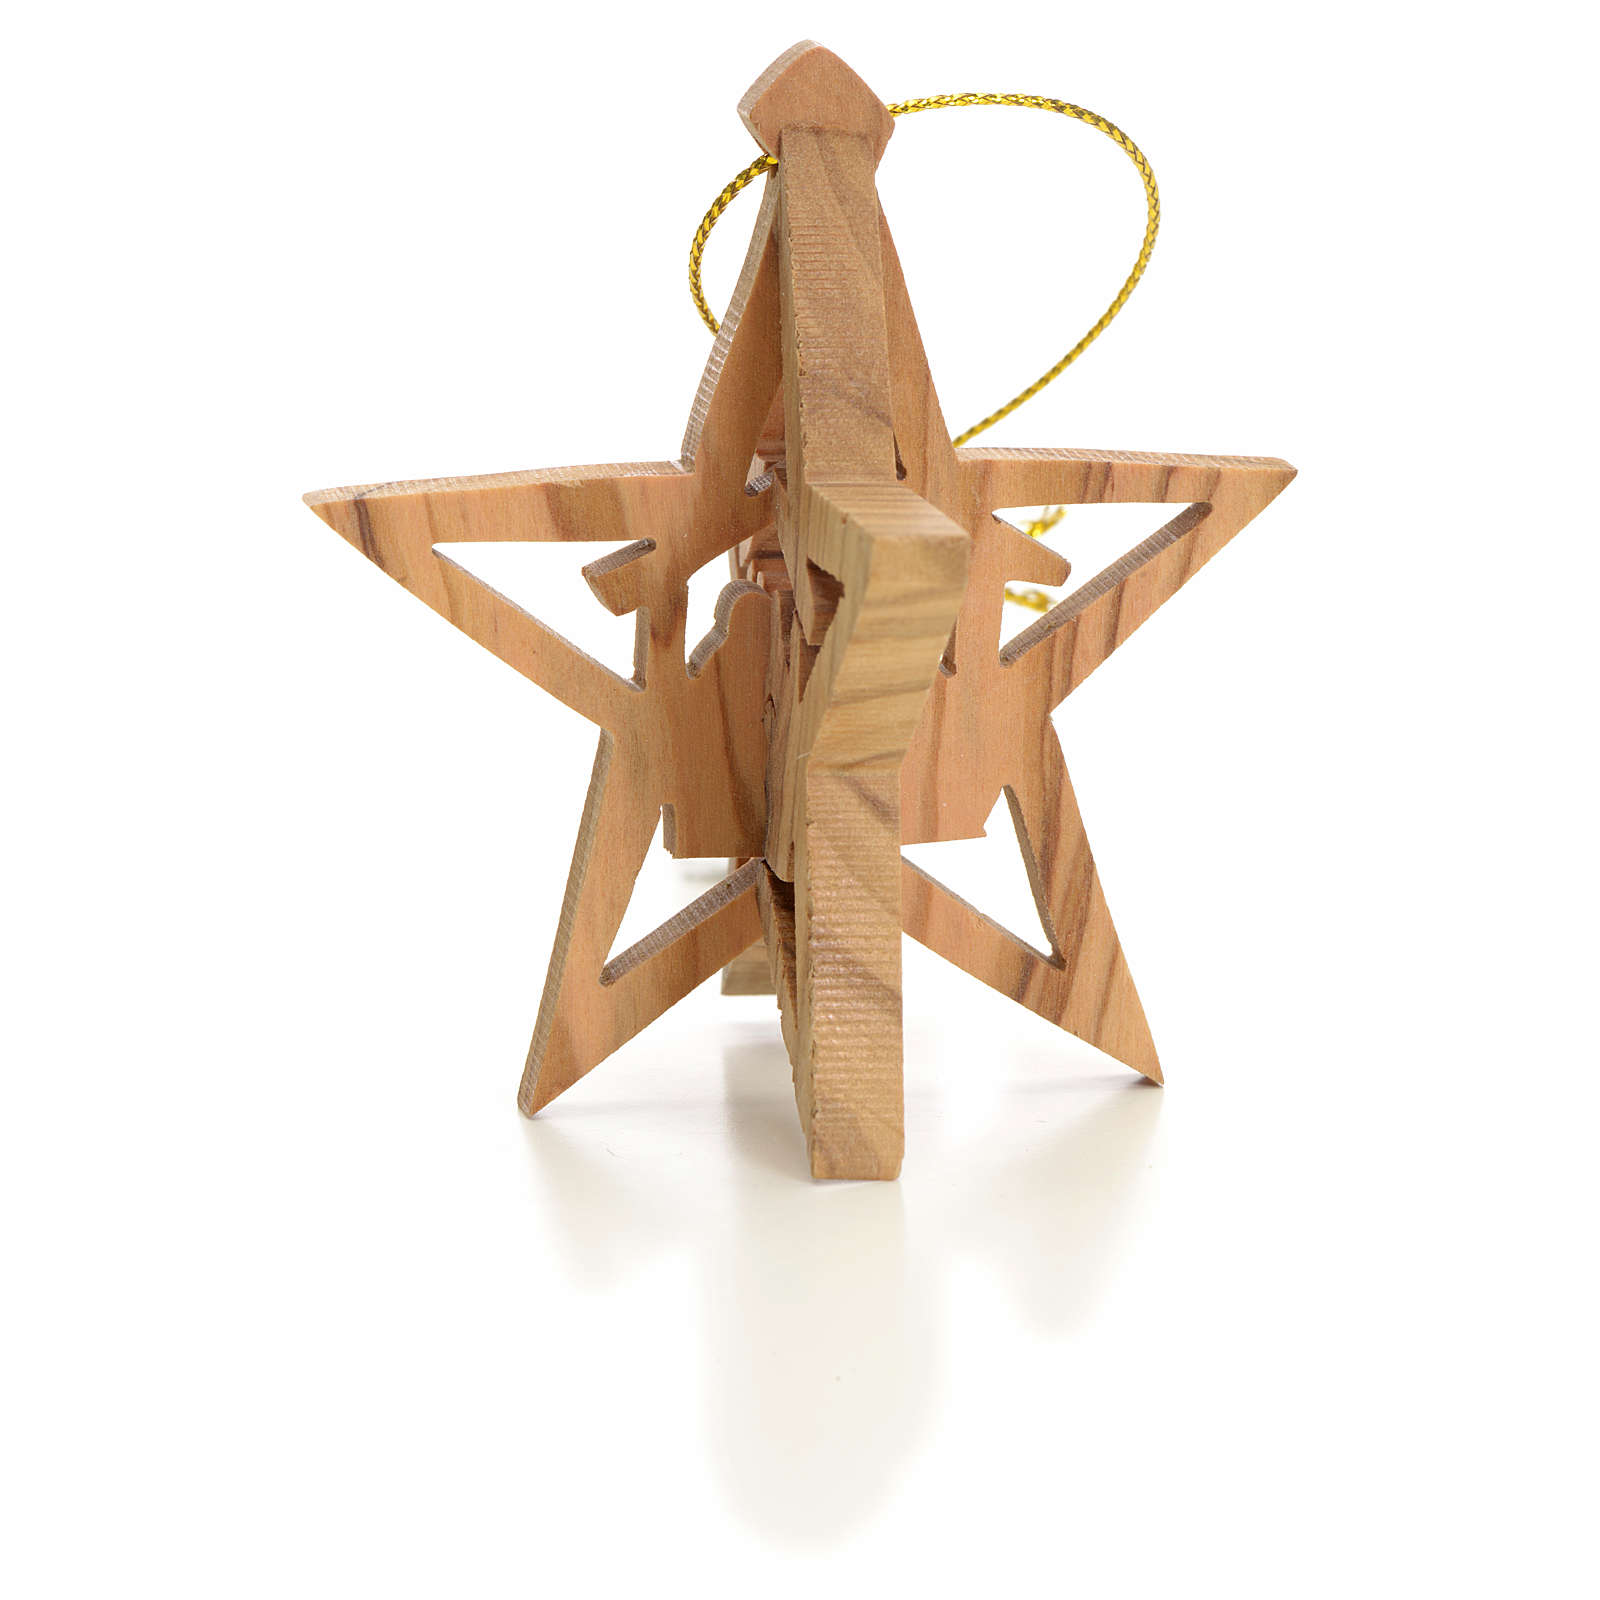 Christmas tree decoration in Holy Land olive wood star with Wise